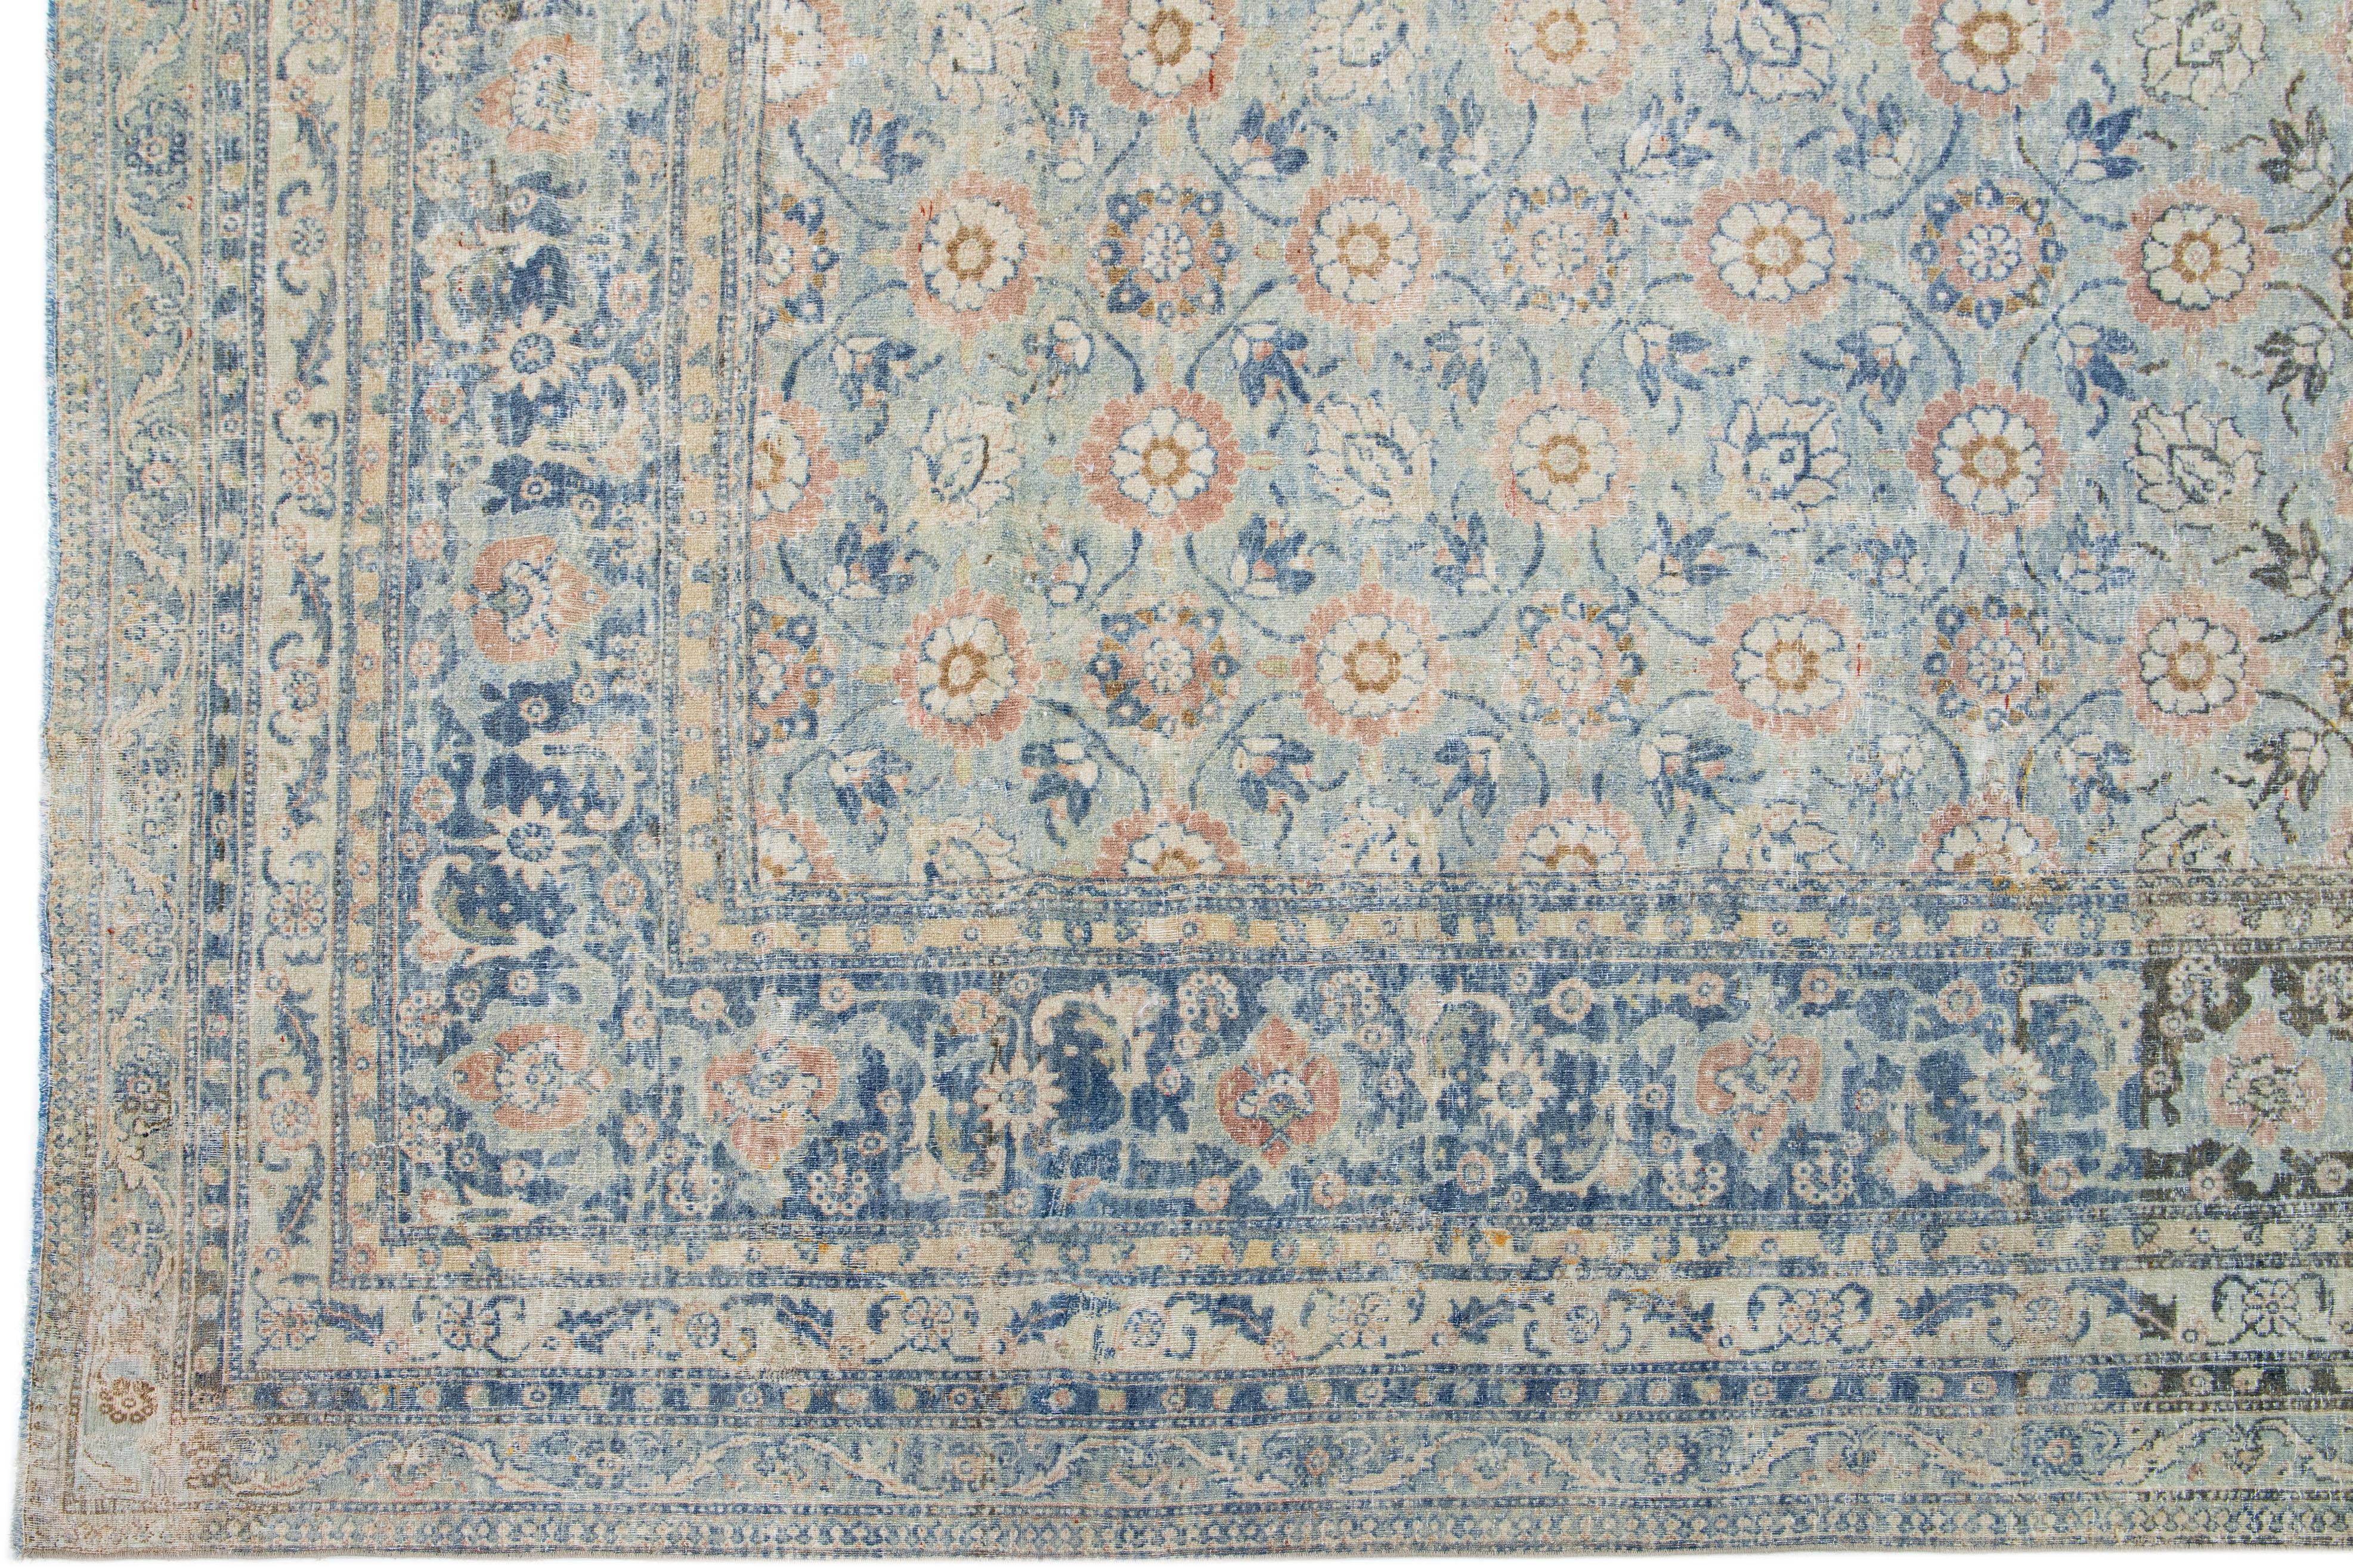 19th Century Antique Persian Tabriz Wool Rug Handmade Blue with Floral Motif For Sale 2